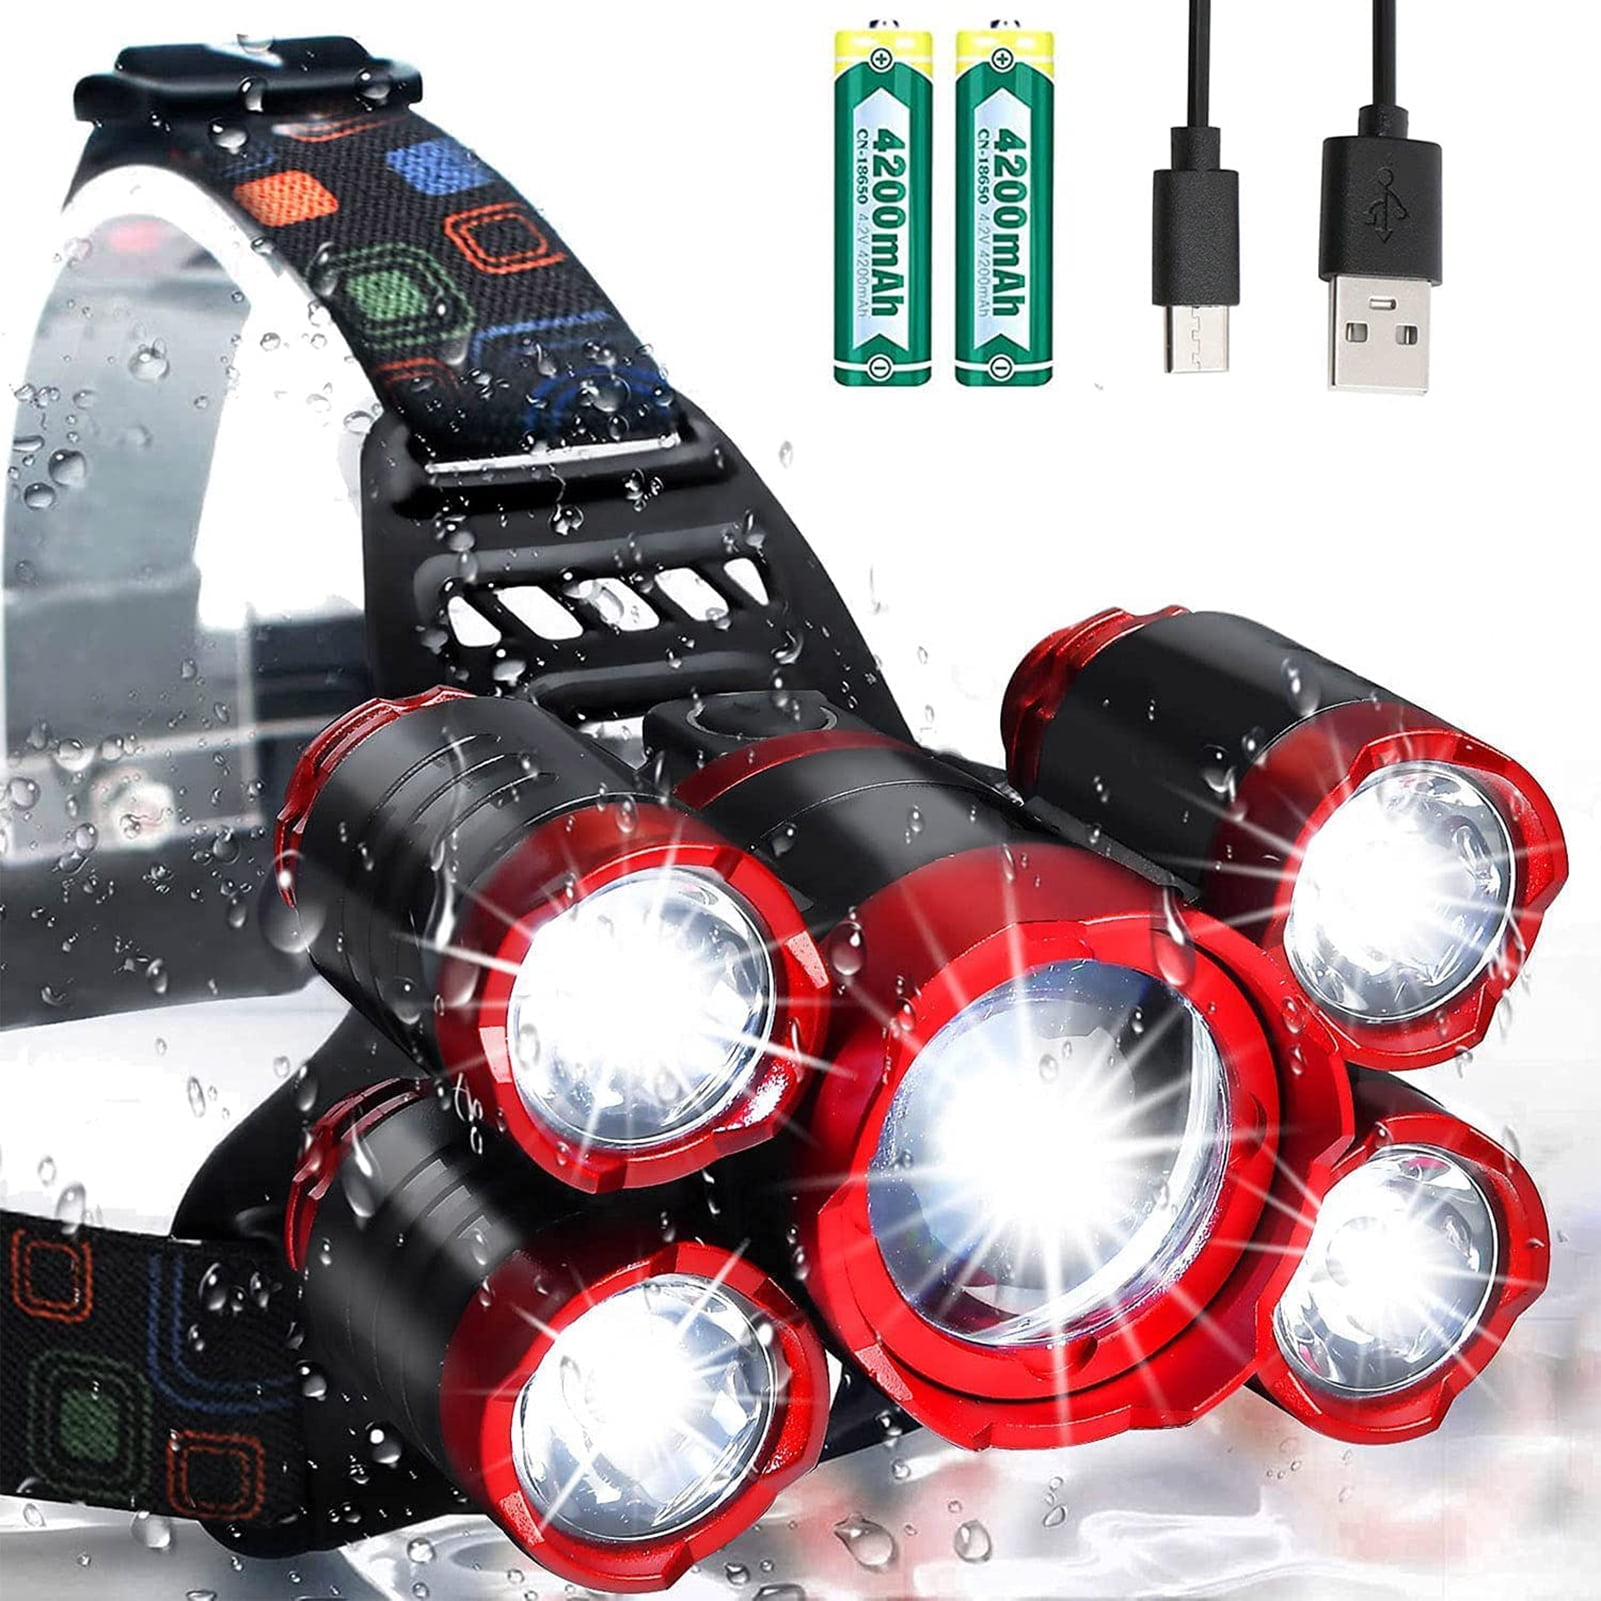 4*350000LM T6 LED Zoomable Headlamp USB Rechargeable Work Light 18*650 Headlight 